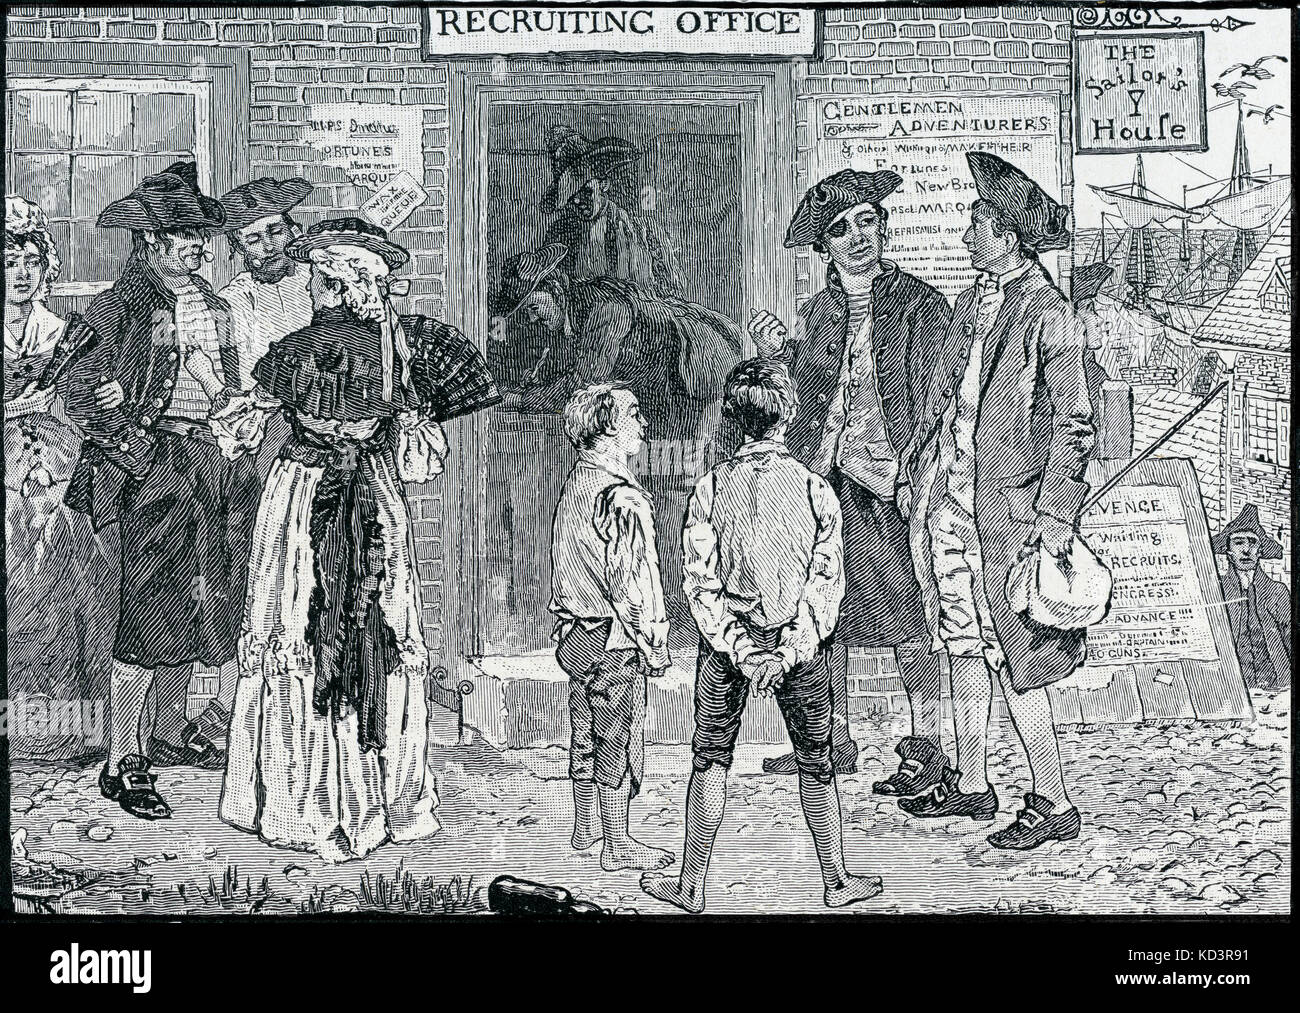 Revolutionary recruting office for American privateers, New London, Connecticut. American Revolution, 1765 - 1783. Illustration by Howard Pyle, 1896 Stock Photo